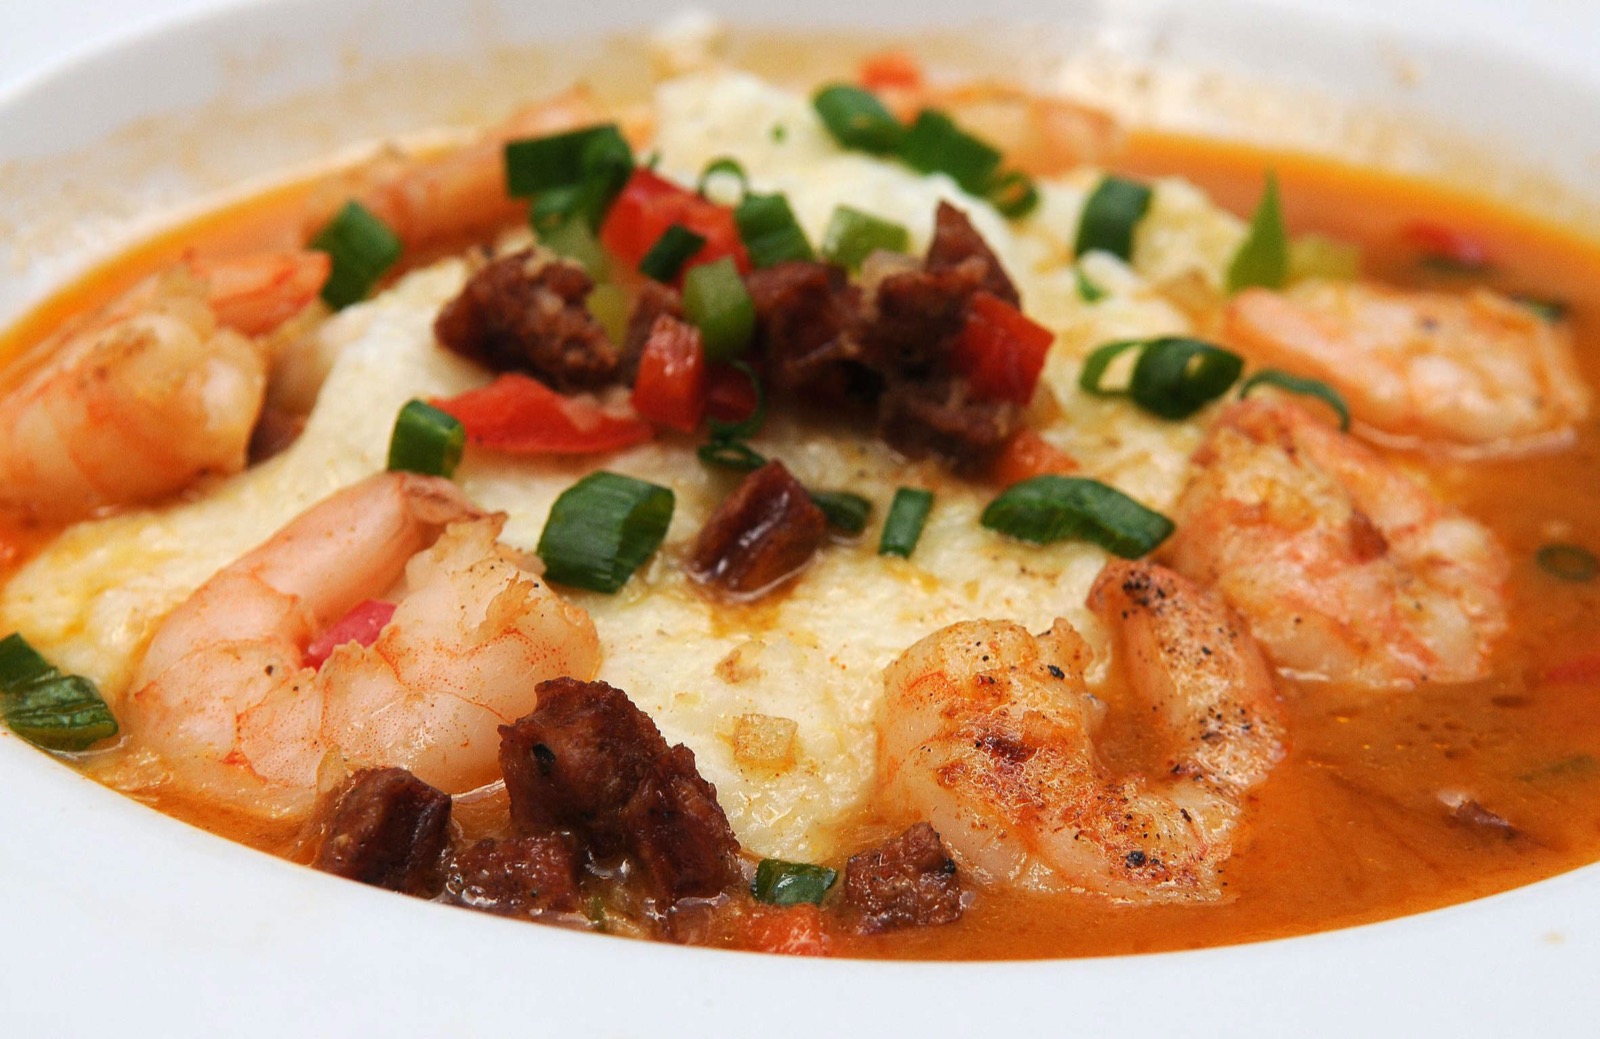 Say “Yum” Or “Yuck” to These Food Pairings to Find Out If You Are More Creative or Logical Shrimp and grits